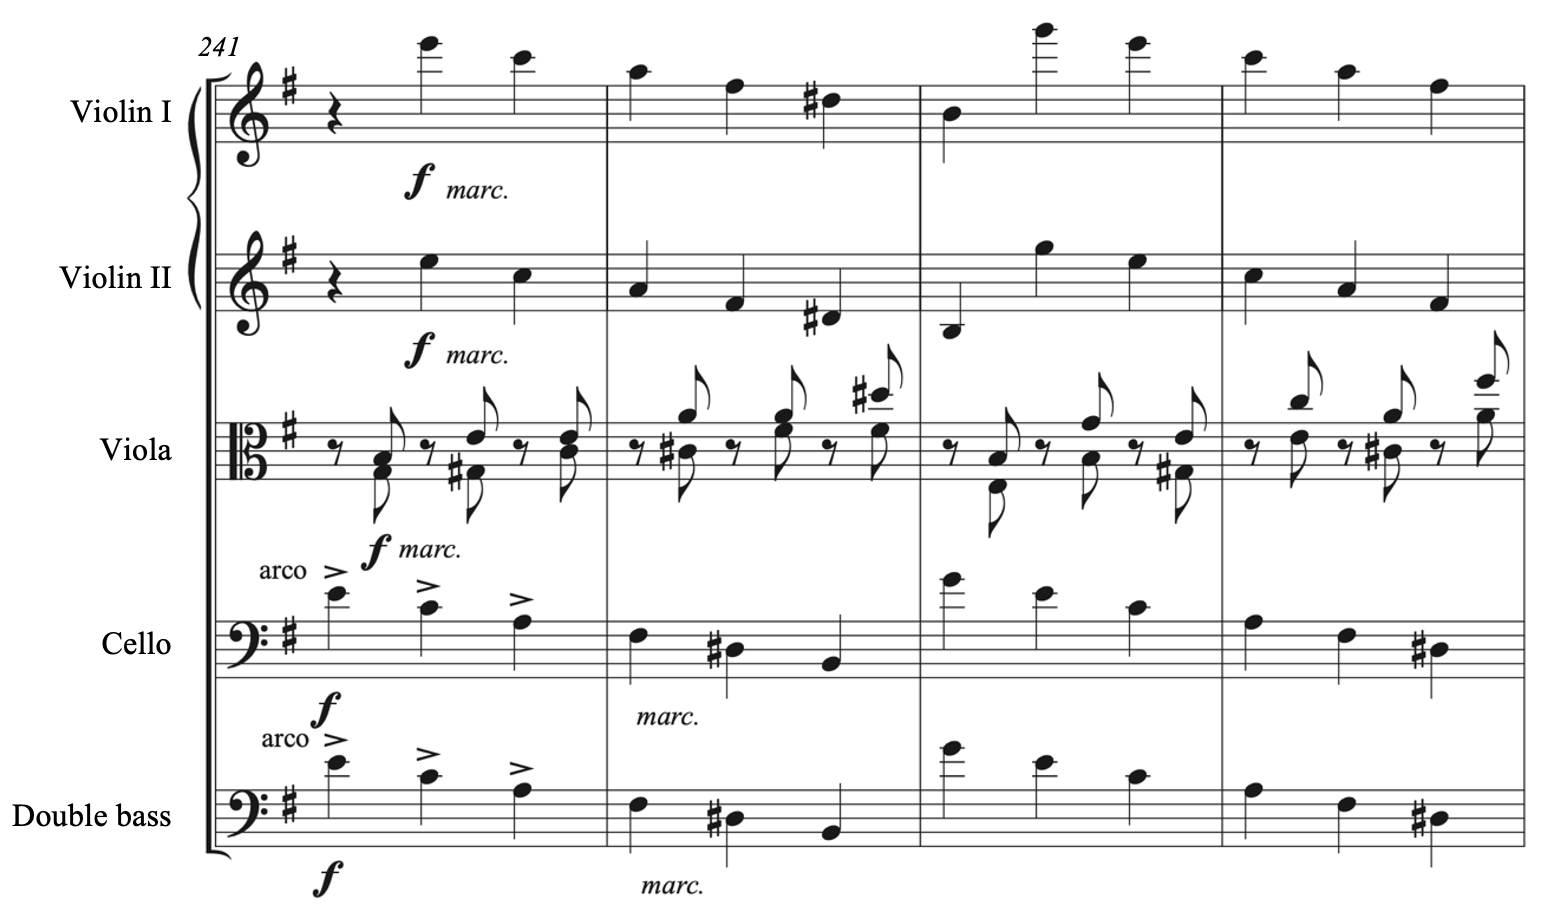 Score excerpt from the last movement of Brahms, Symphony No. 4